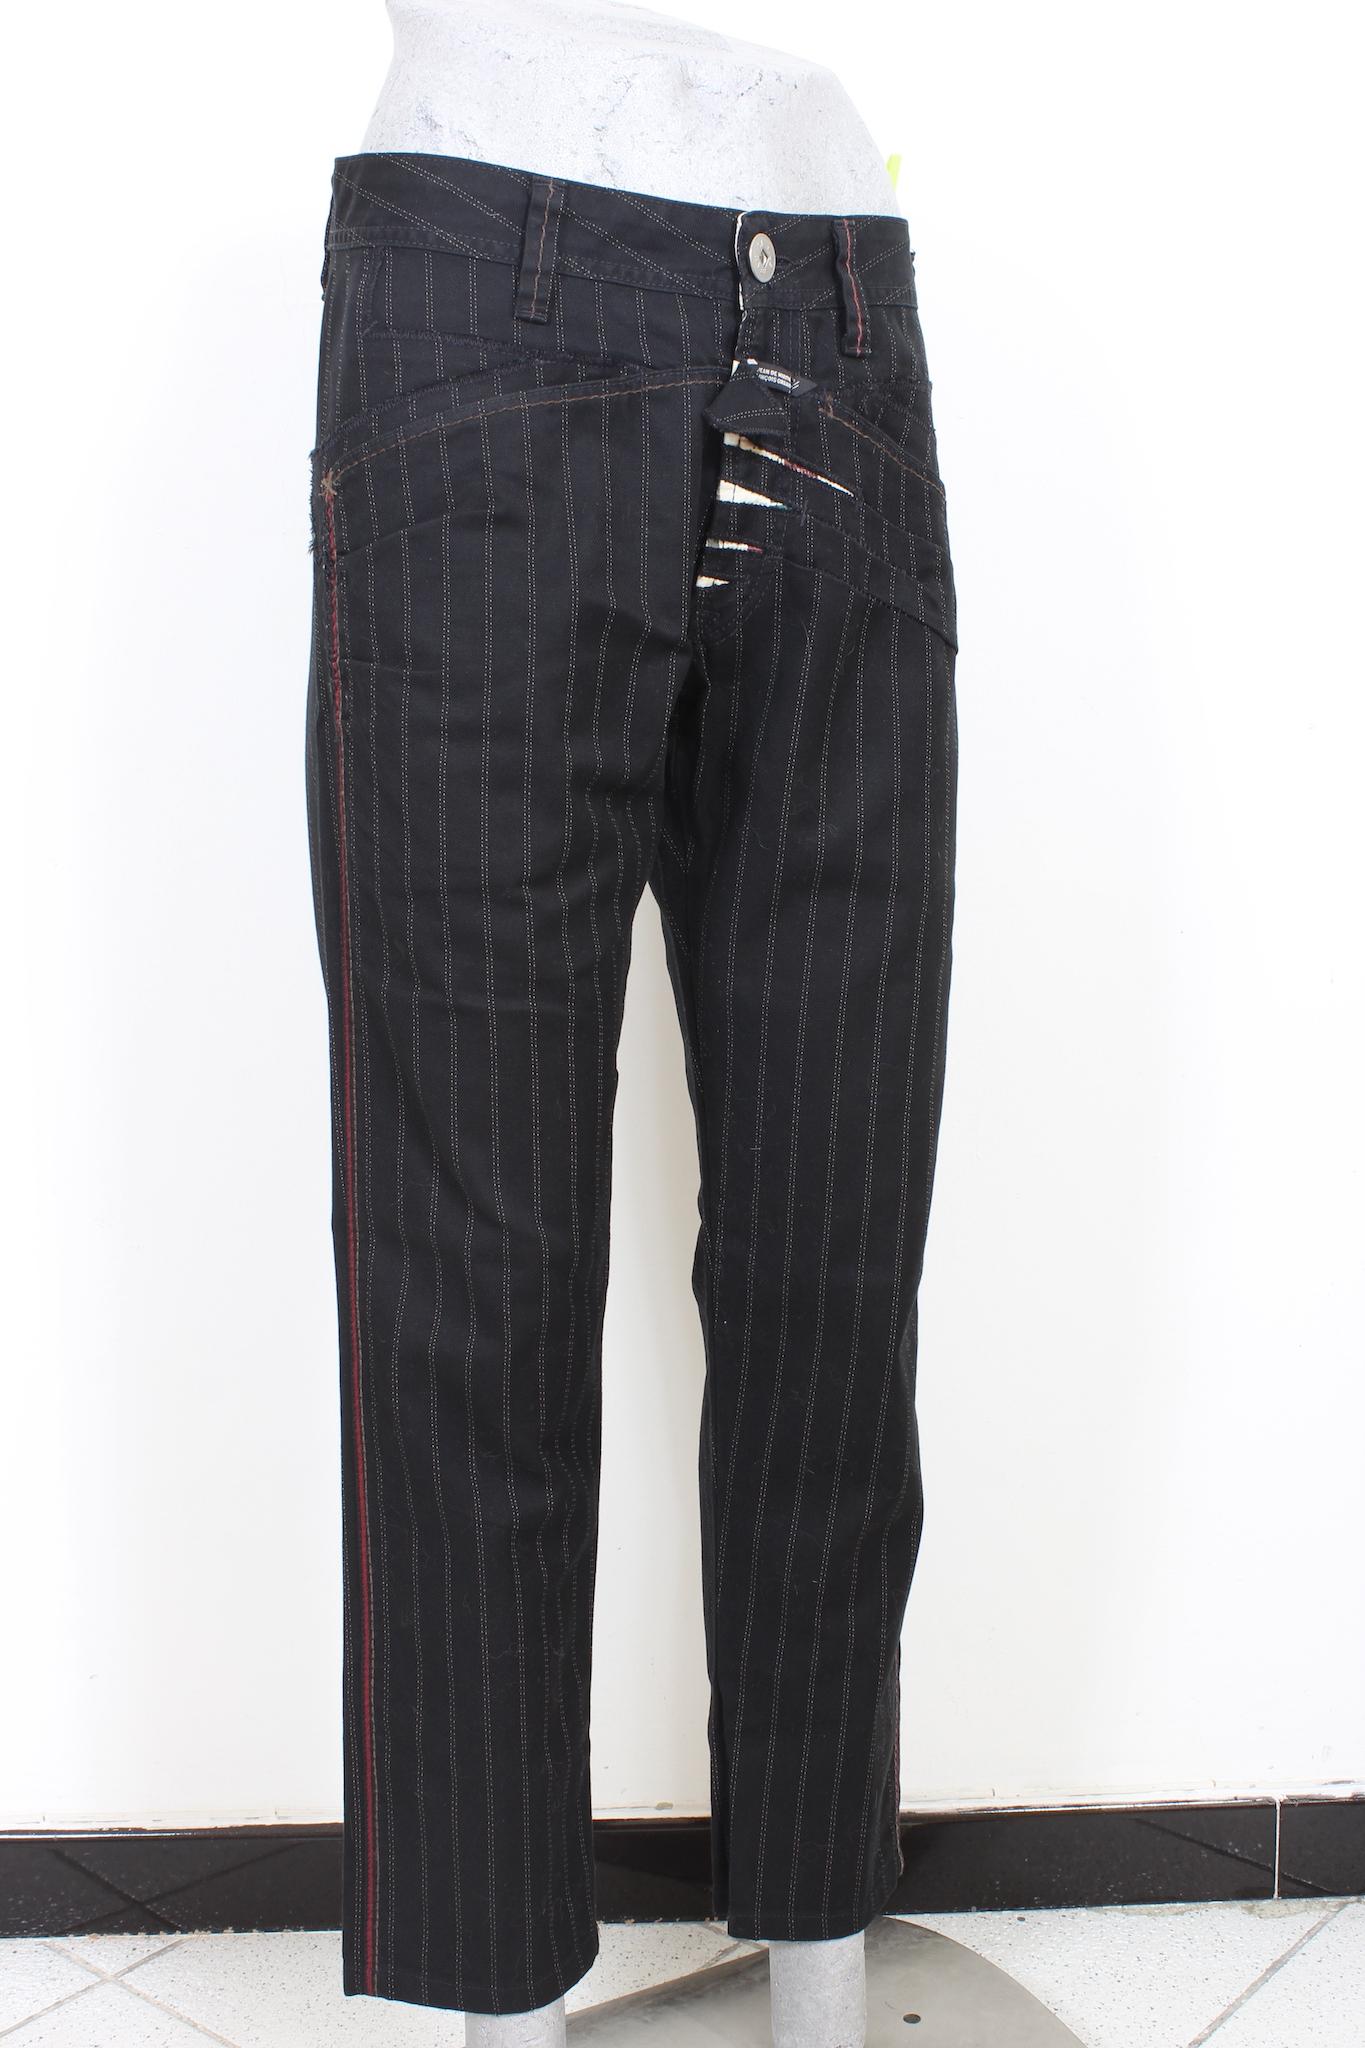 Marithe Francois Girbaud Black Pinstripe Cotton Trousers 90s 1